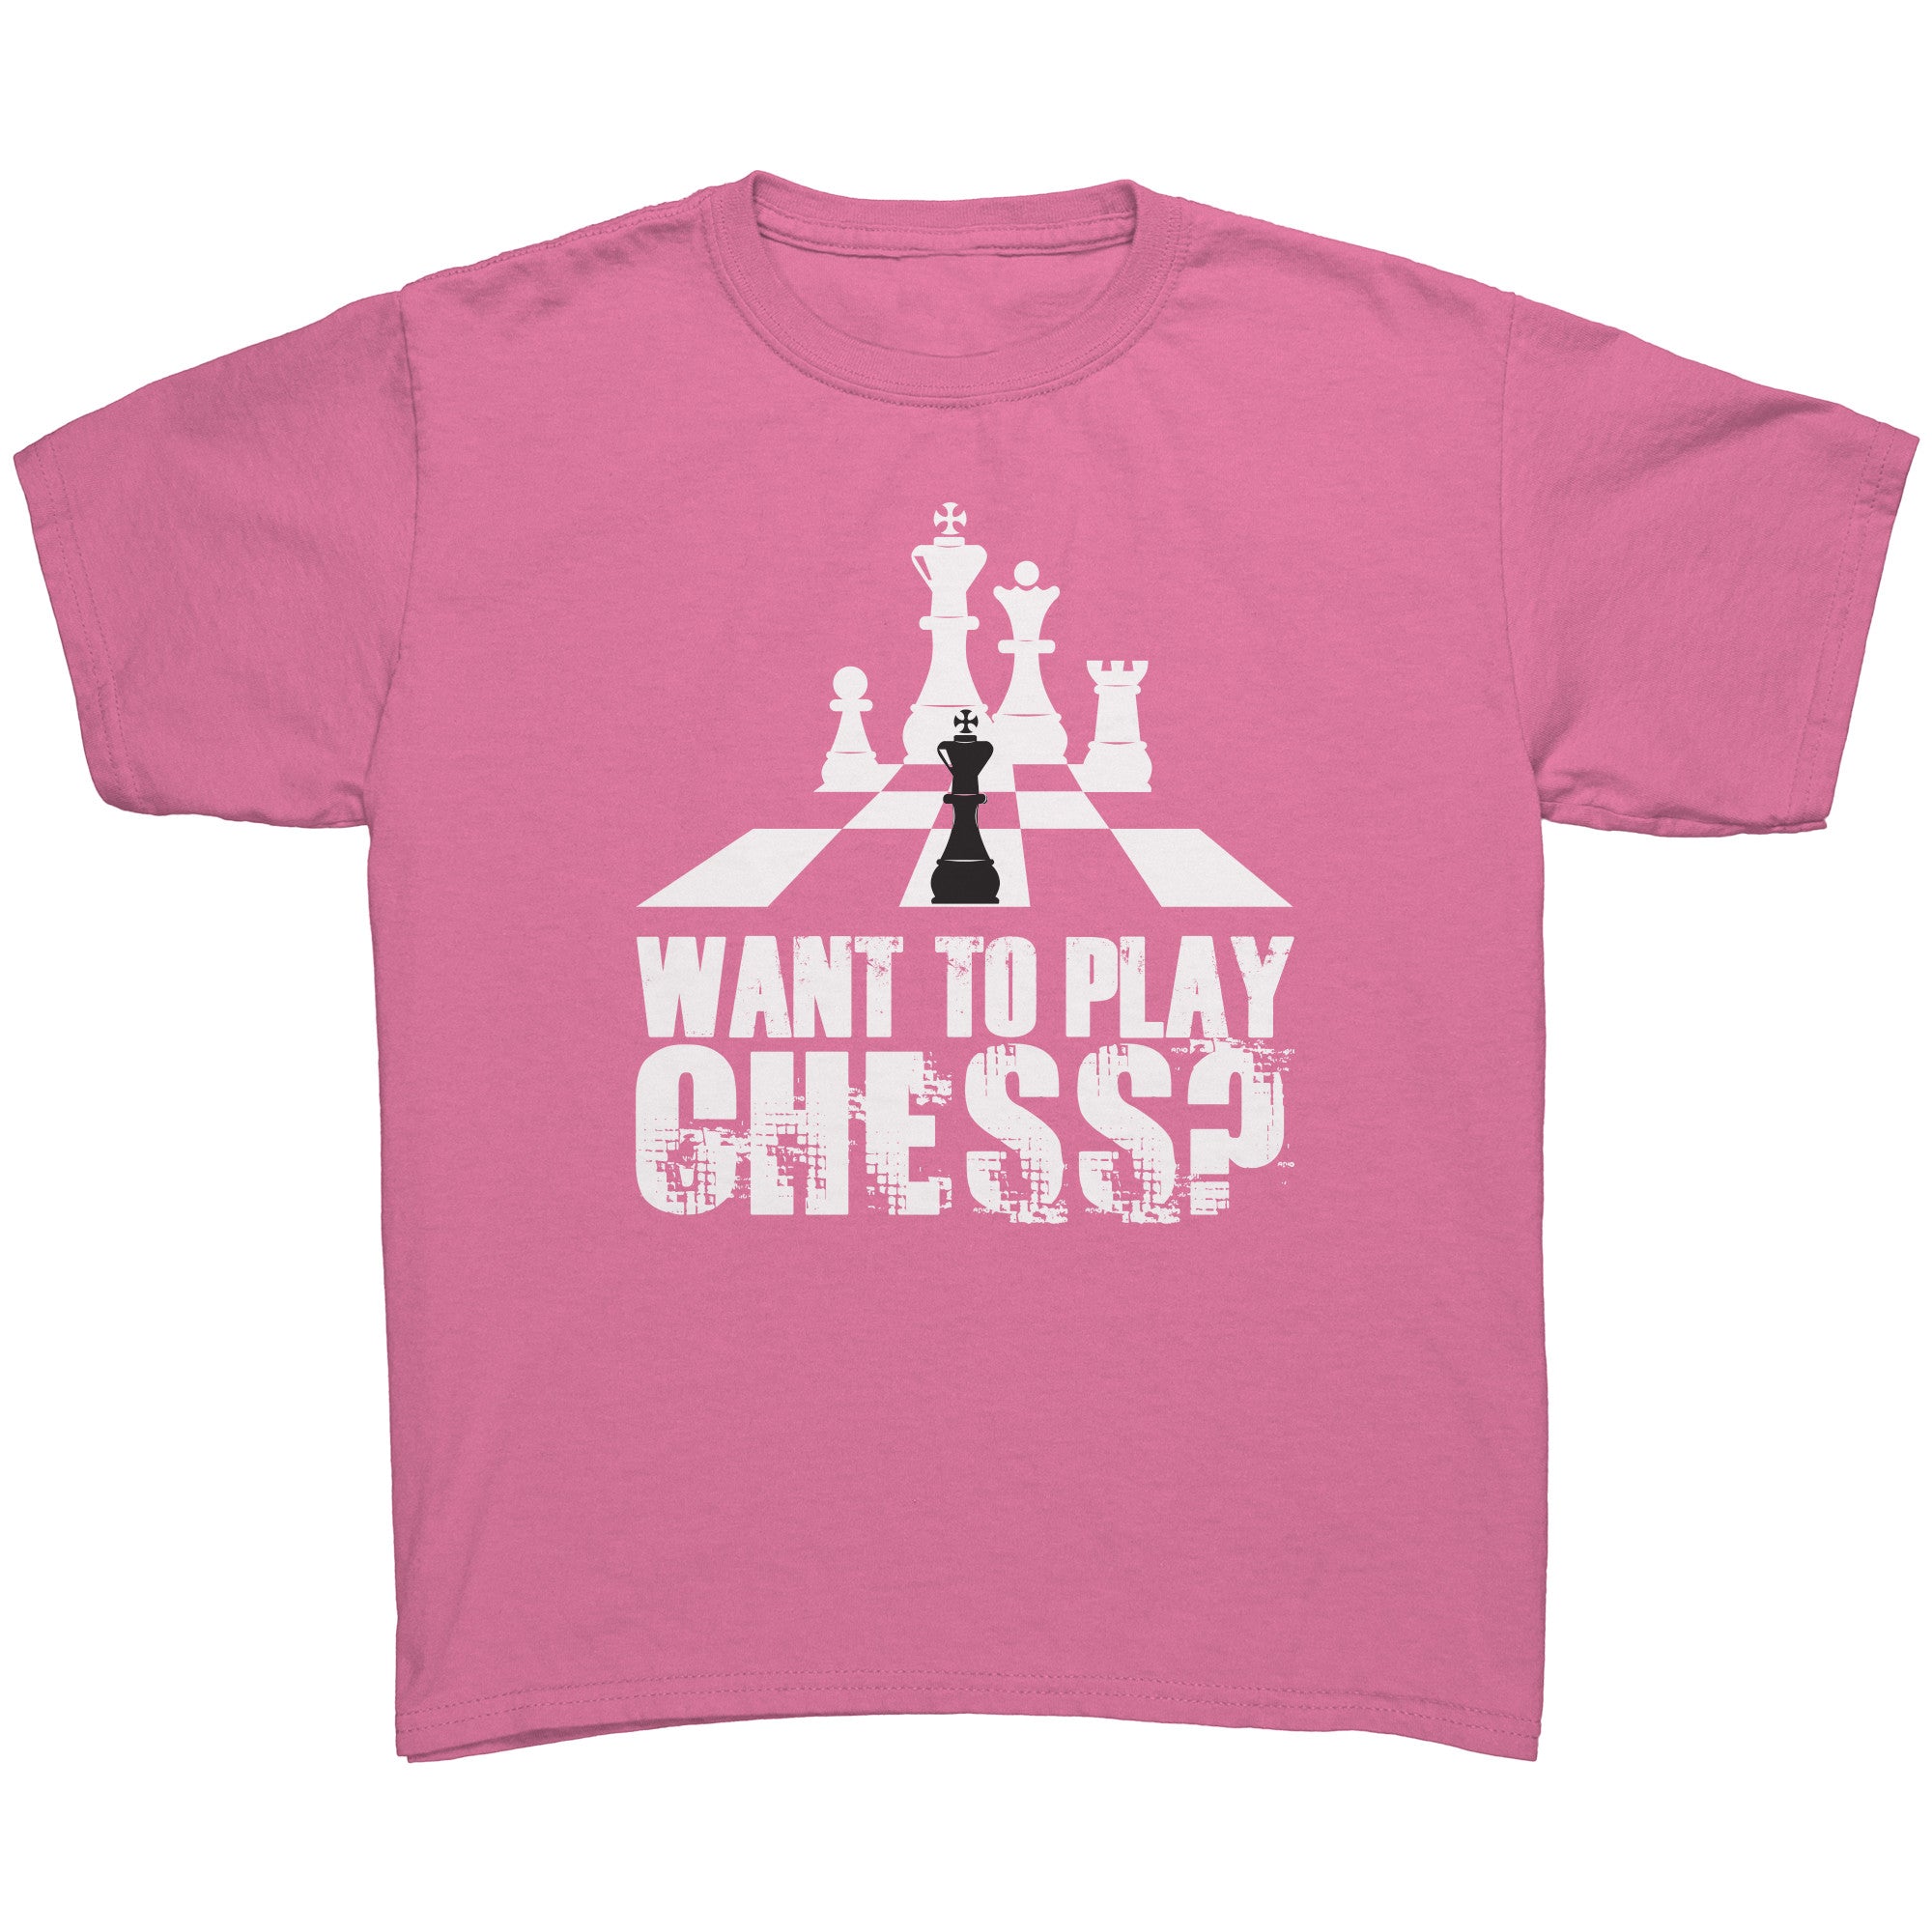 Want to play chess? - Youth T-Shirt